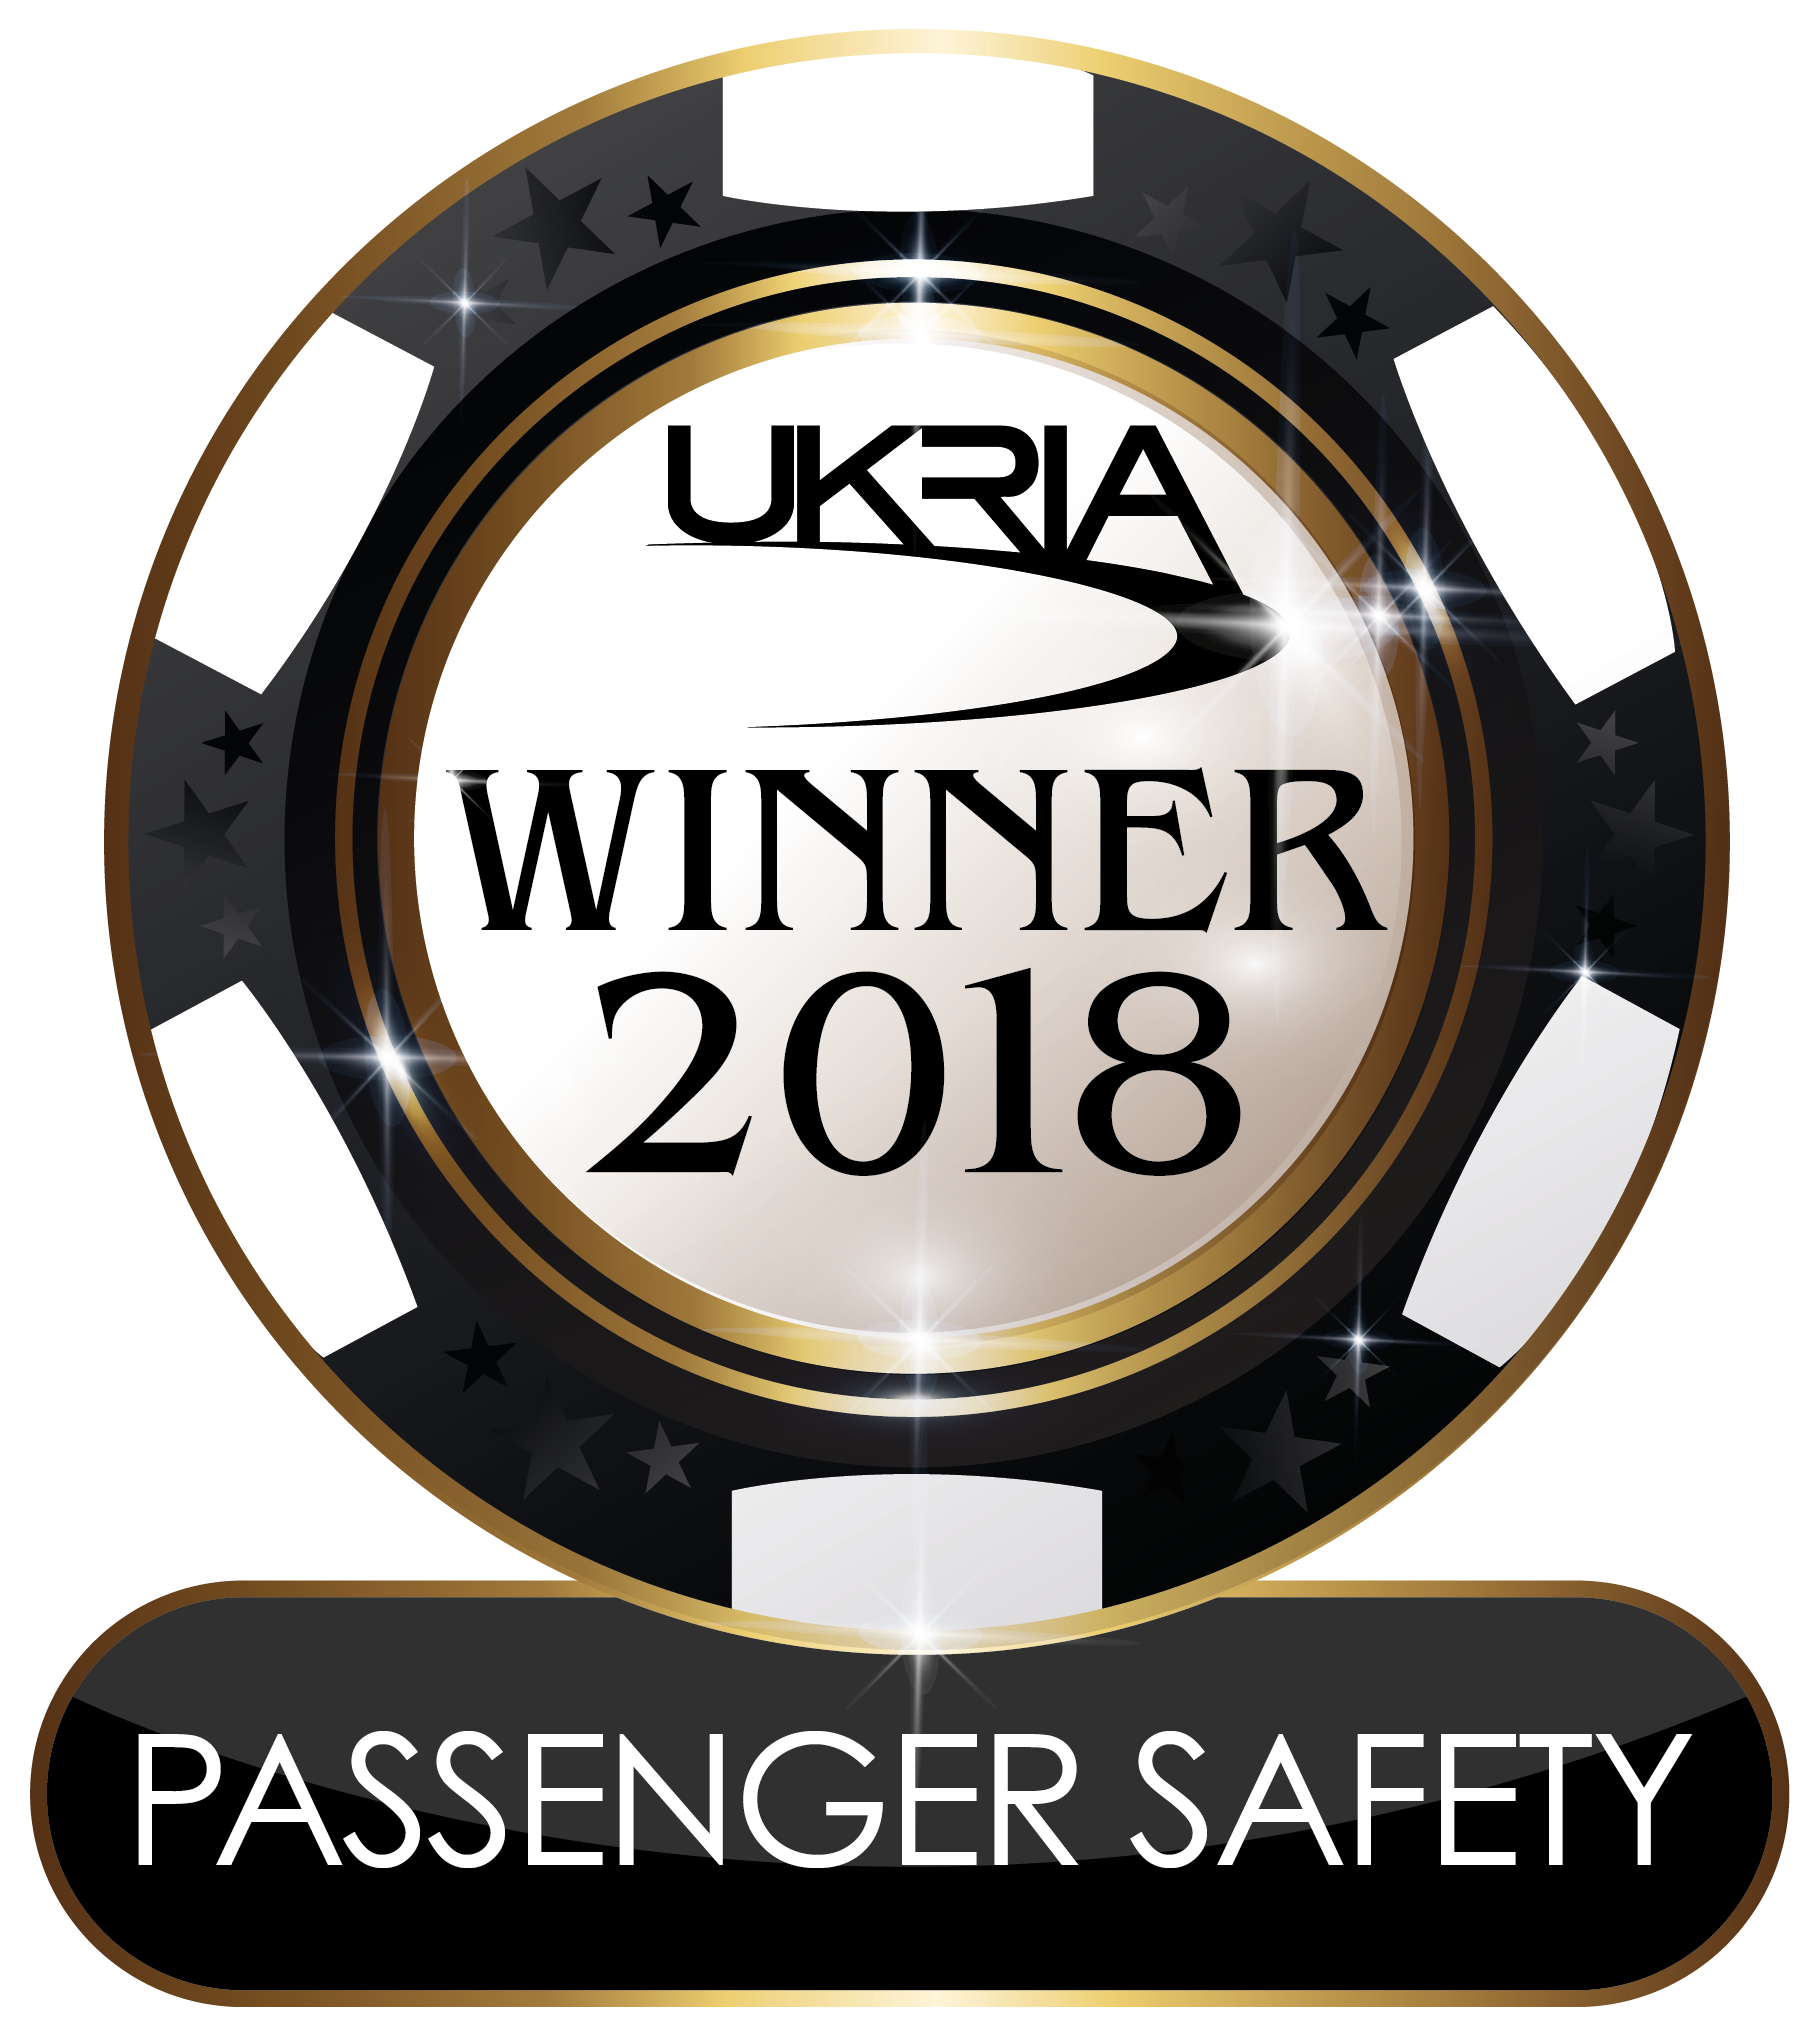 images/certificate/Passenger-Safety.png